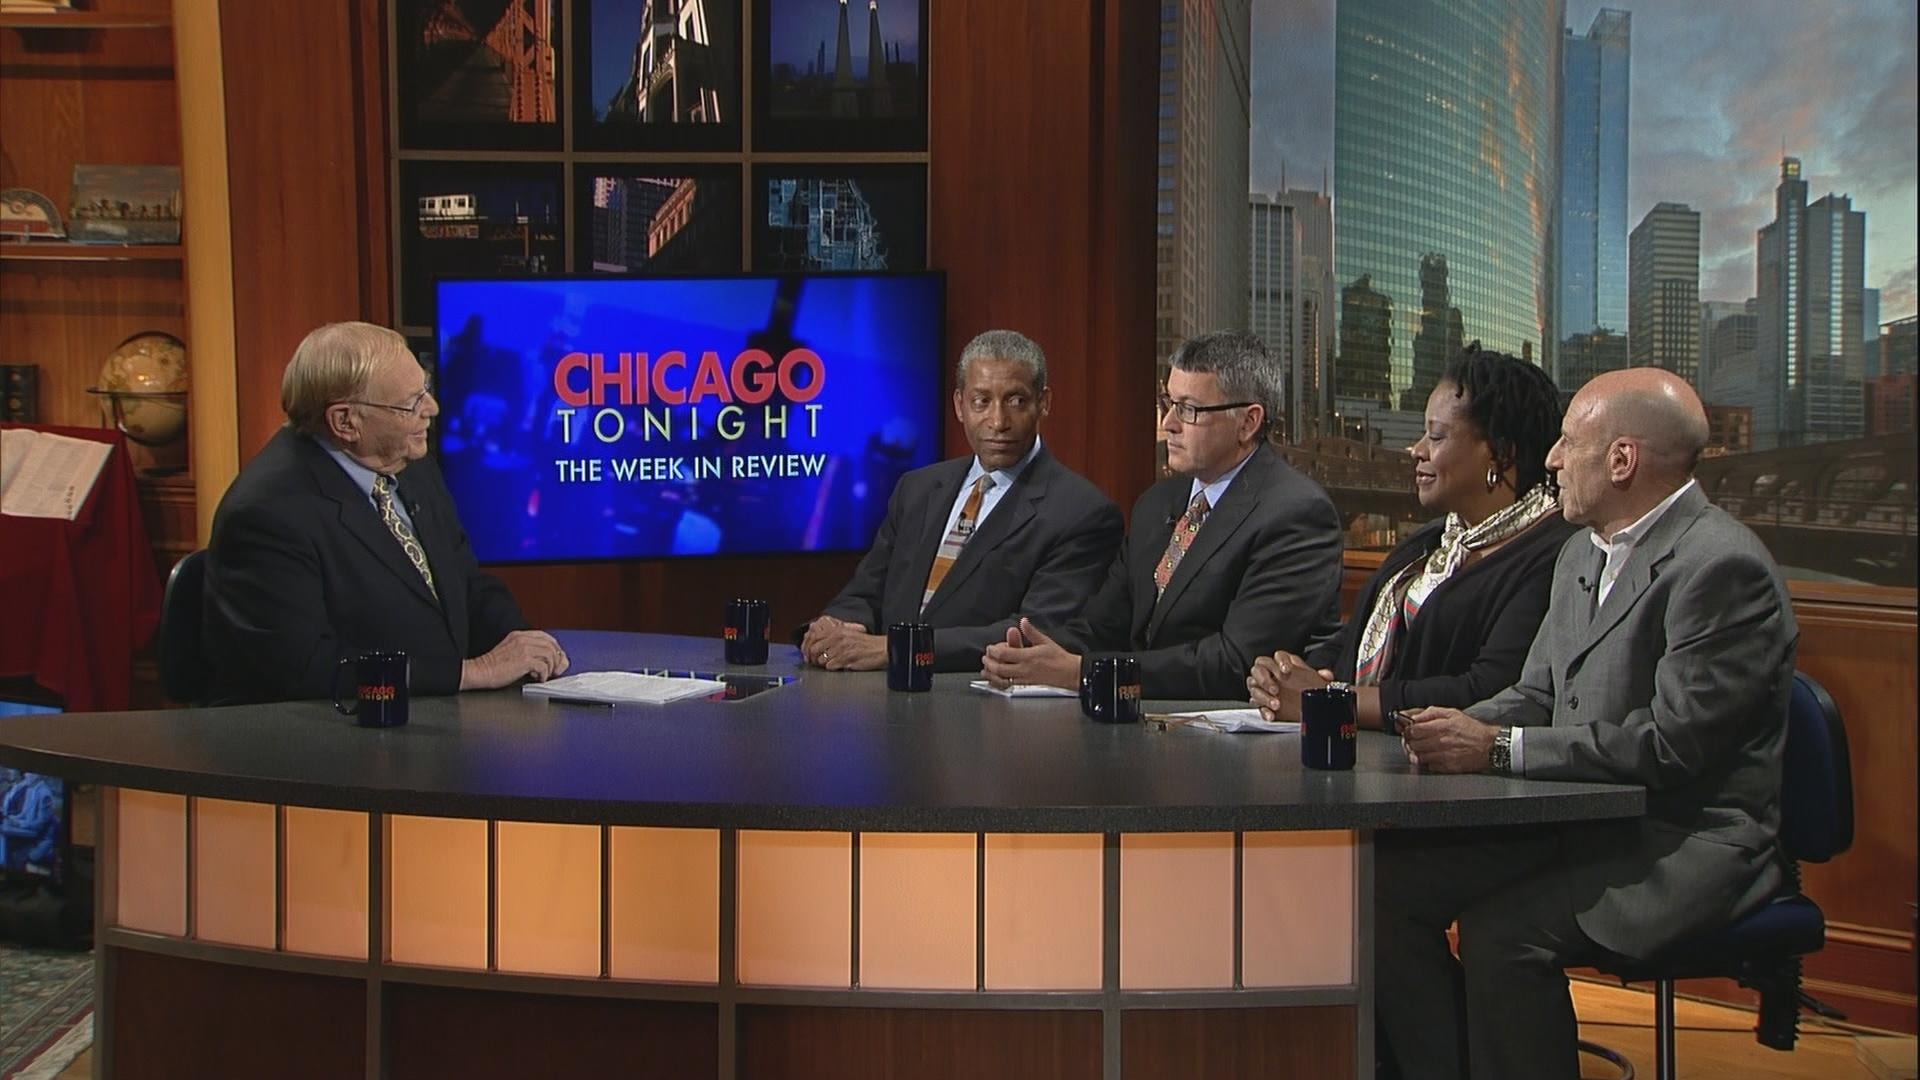 Video Chicago Tonight The Week in Review 8/15 Watch Chicago